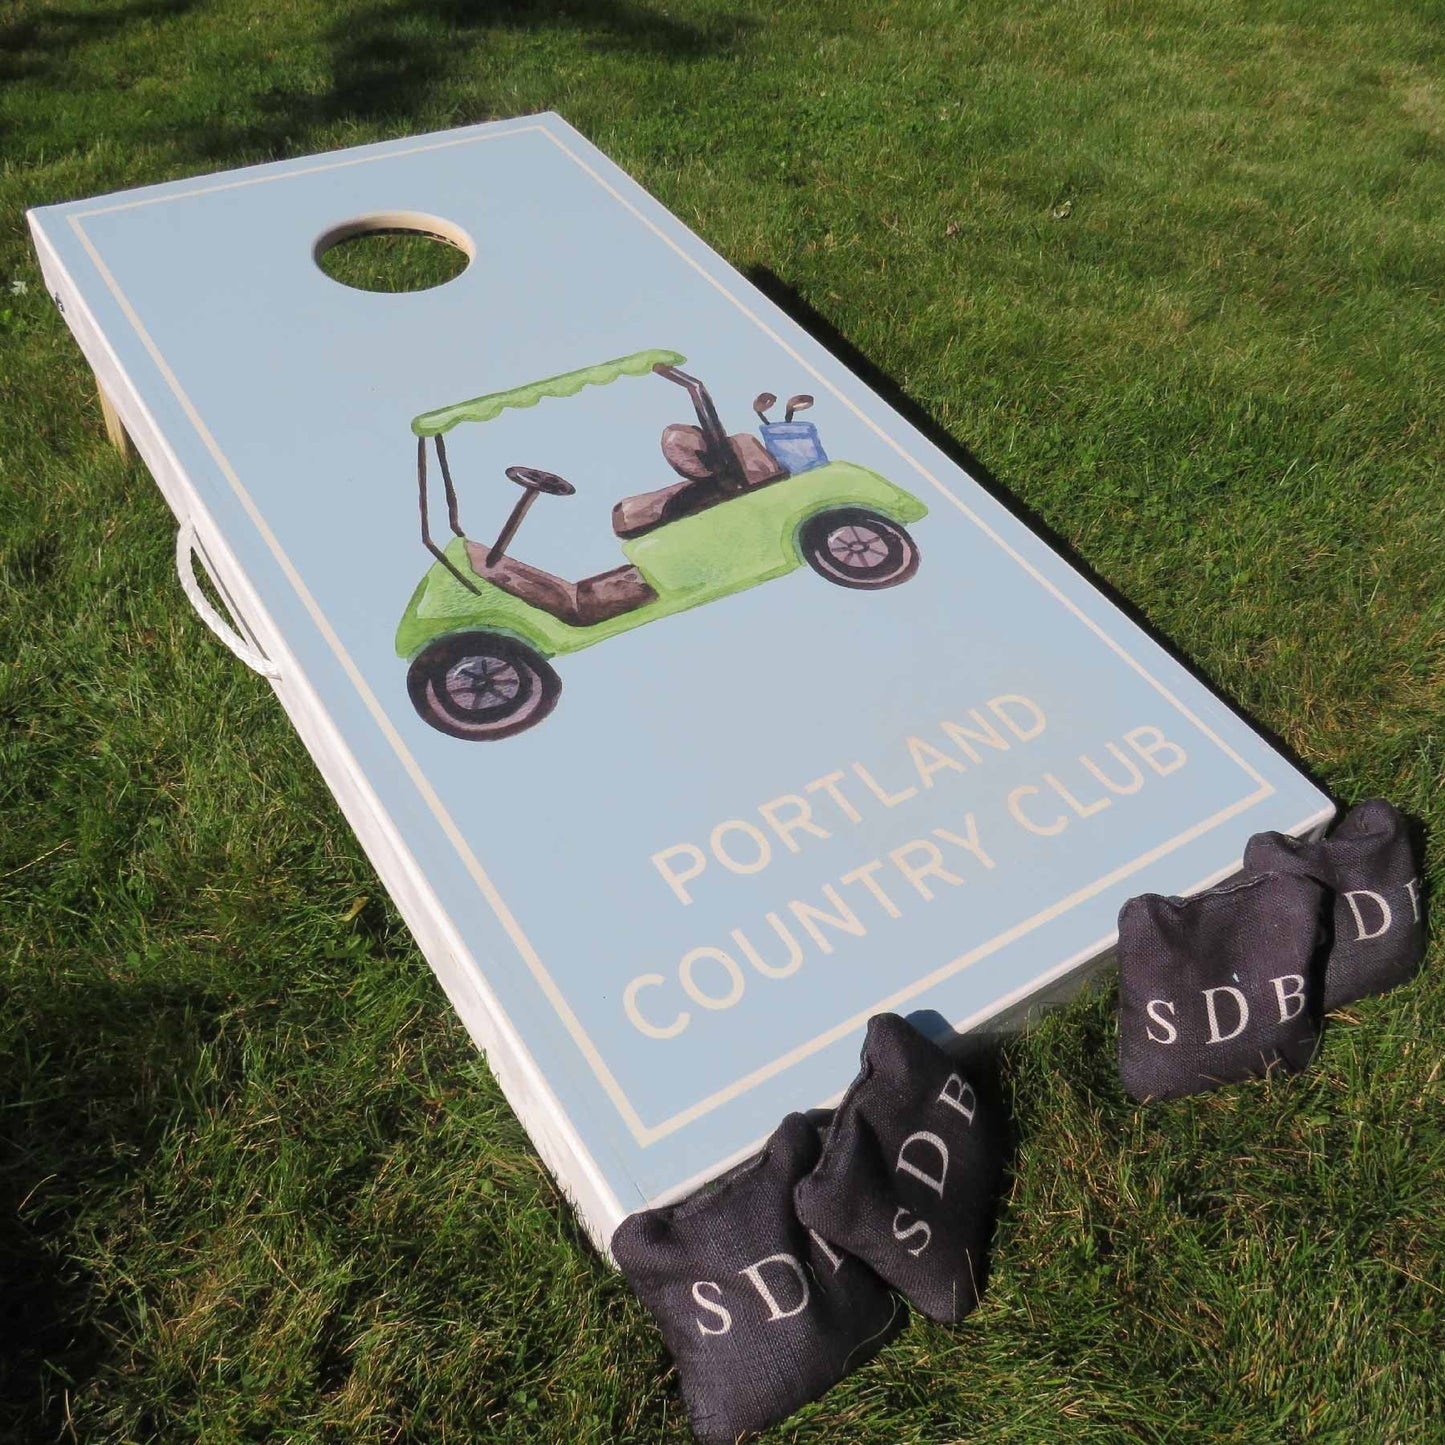 Luxury Personalized Cornhole Boards - Block Island - A Perfect Wedding Or Shower Gift!